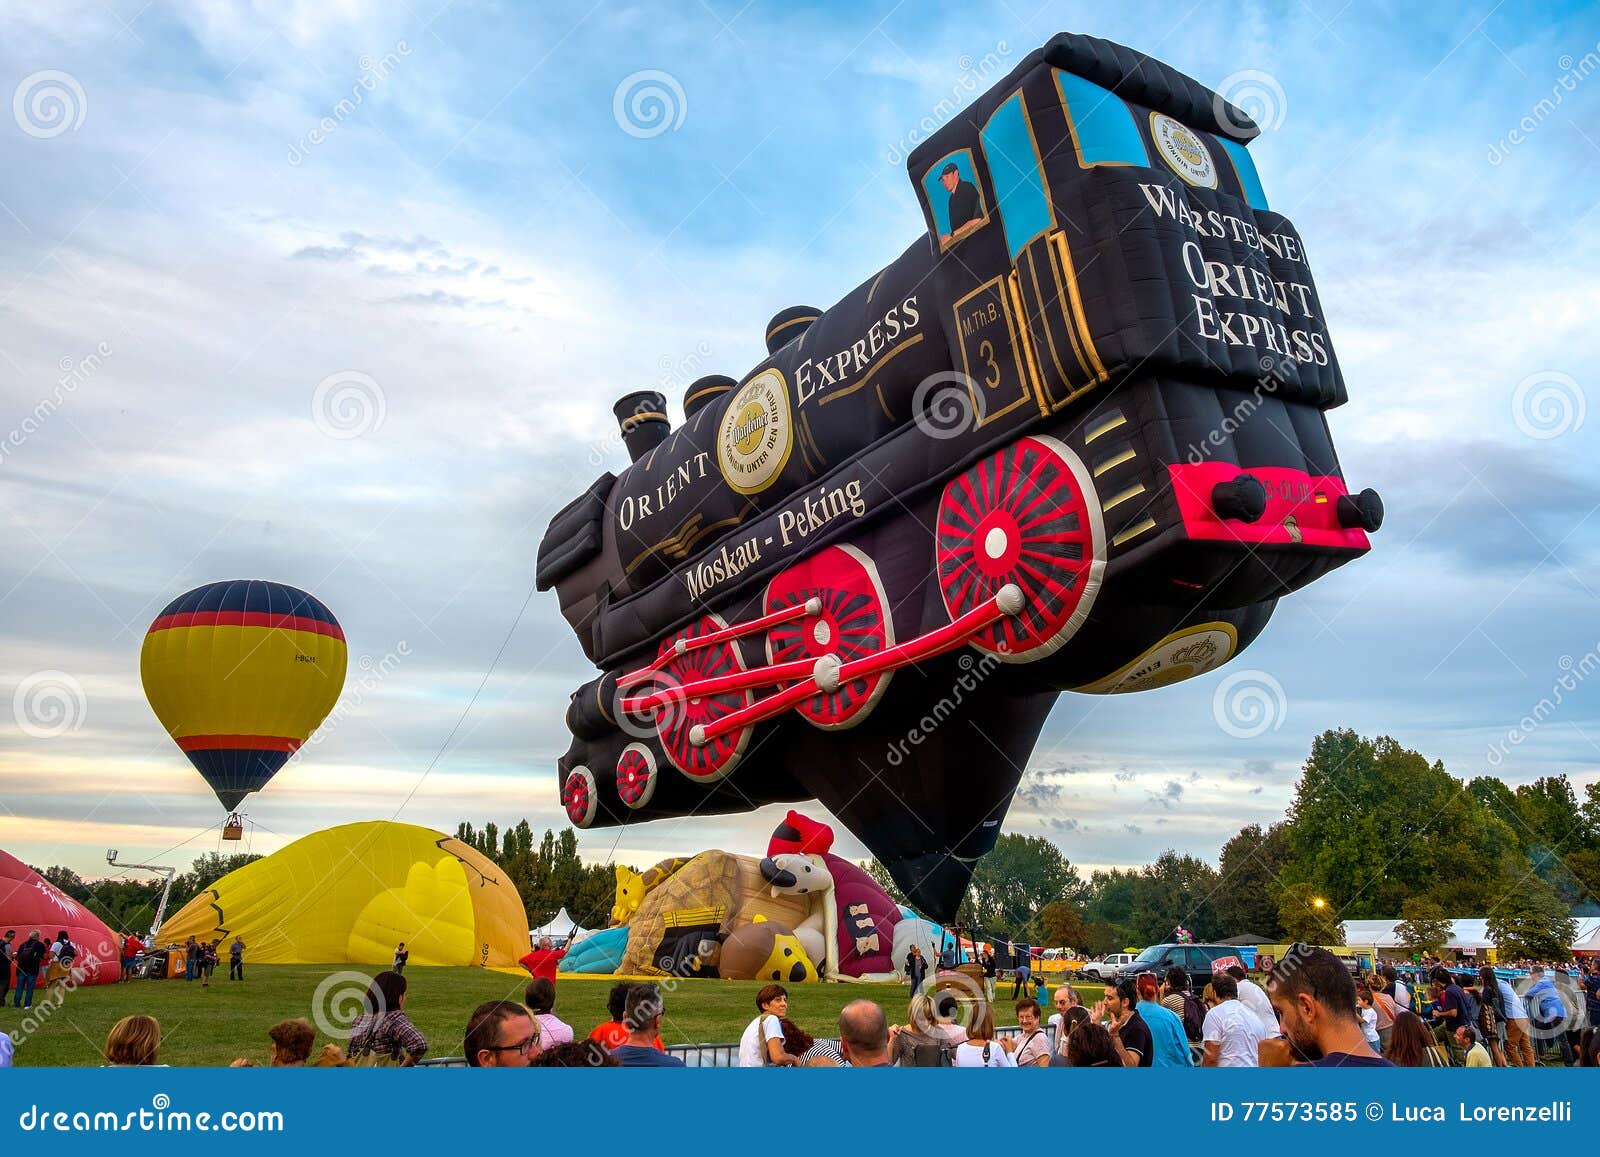 Ferrara Italy 16 September 16 A Special Shapes Hot Air Baloon Inspired By The Famous Orient Express Train Editorial Image Image Of Giant Show